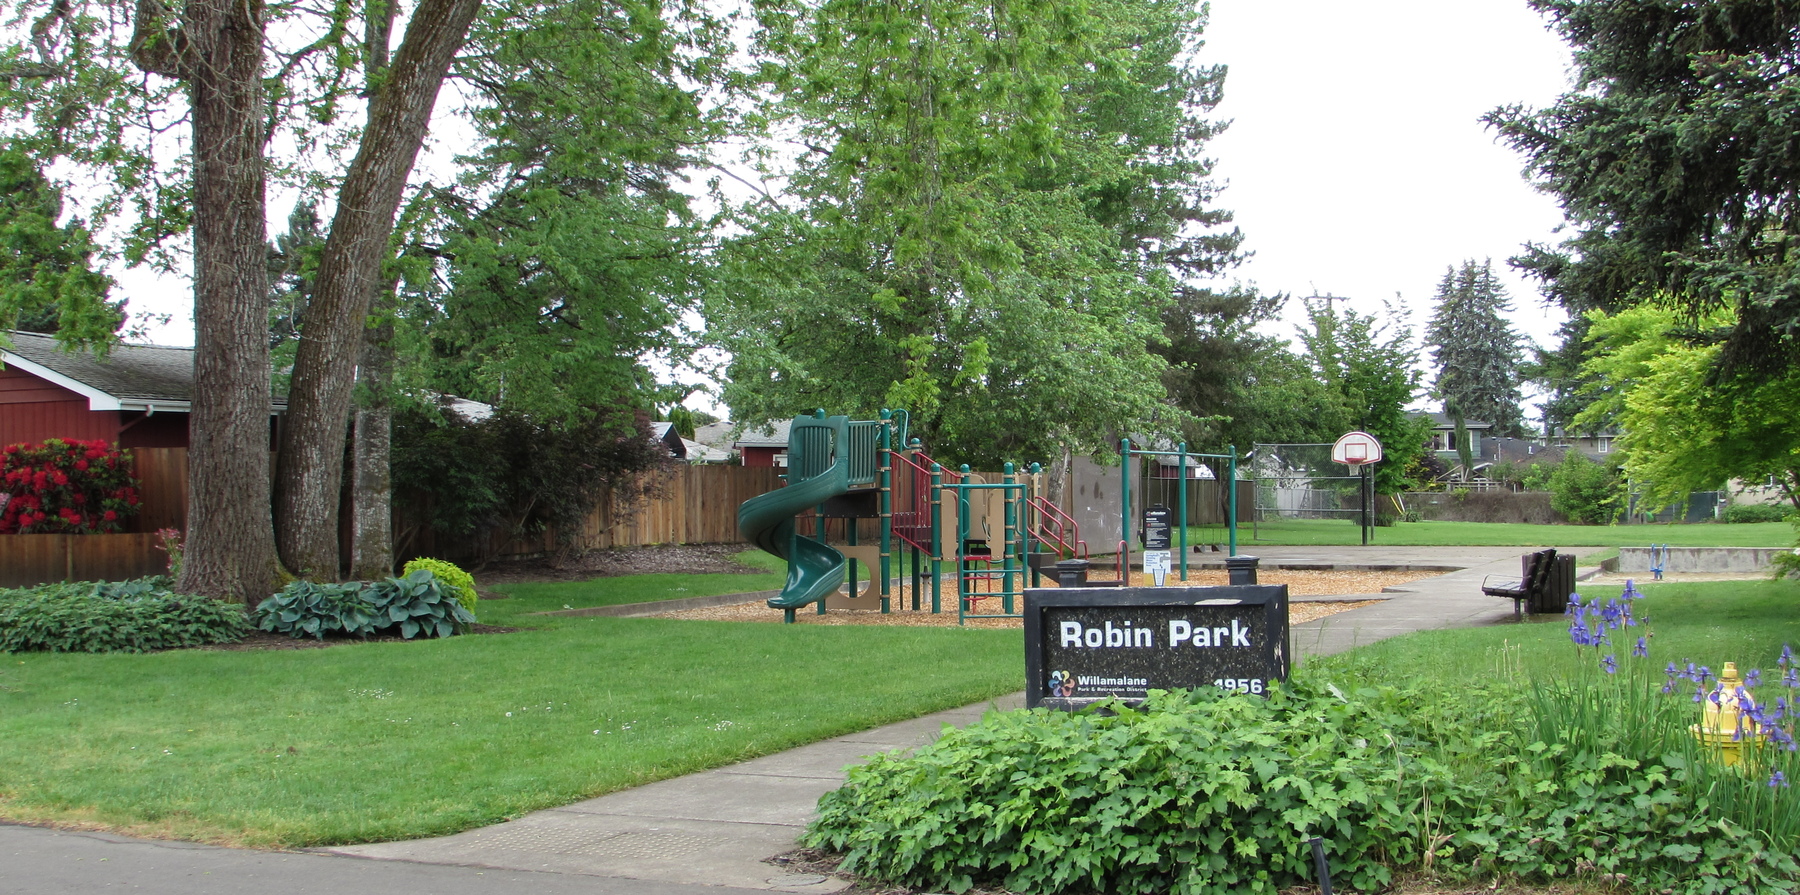 The entrance to Robin park shows a small playground and a paved path